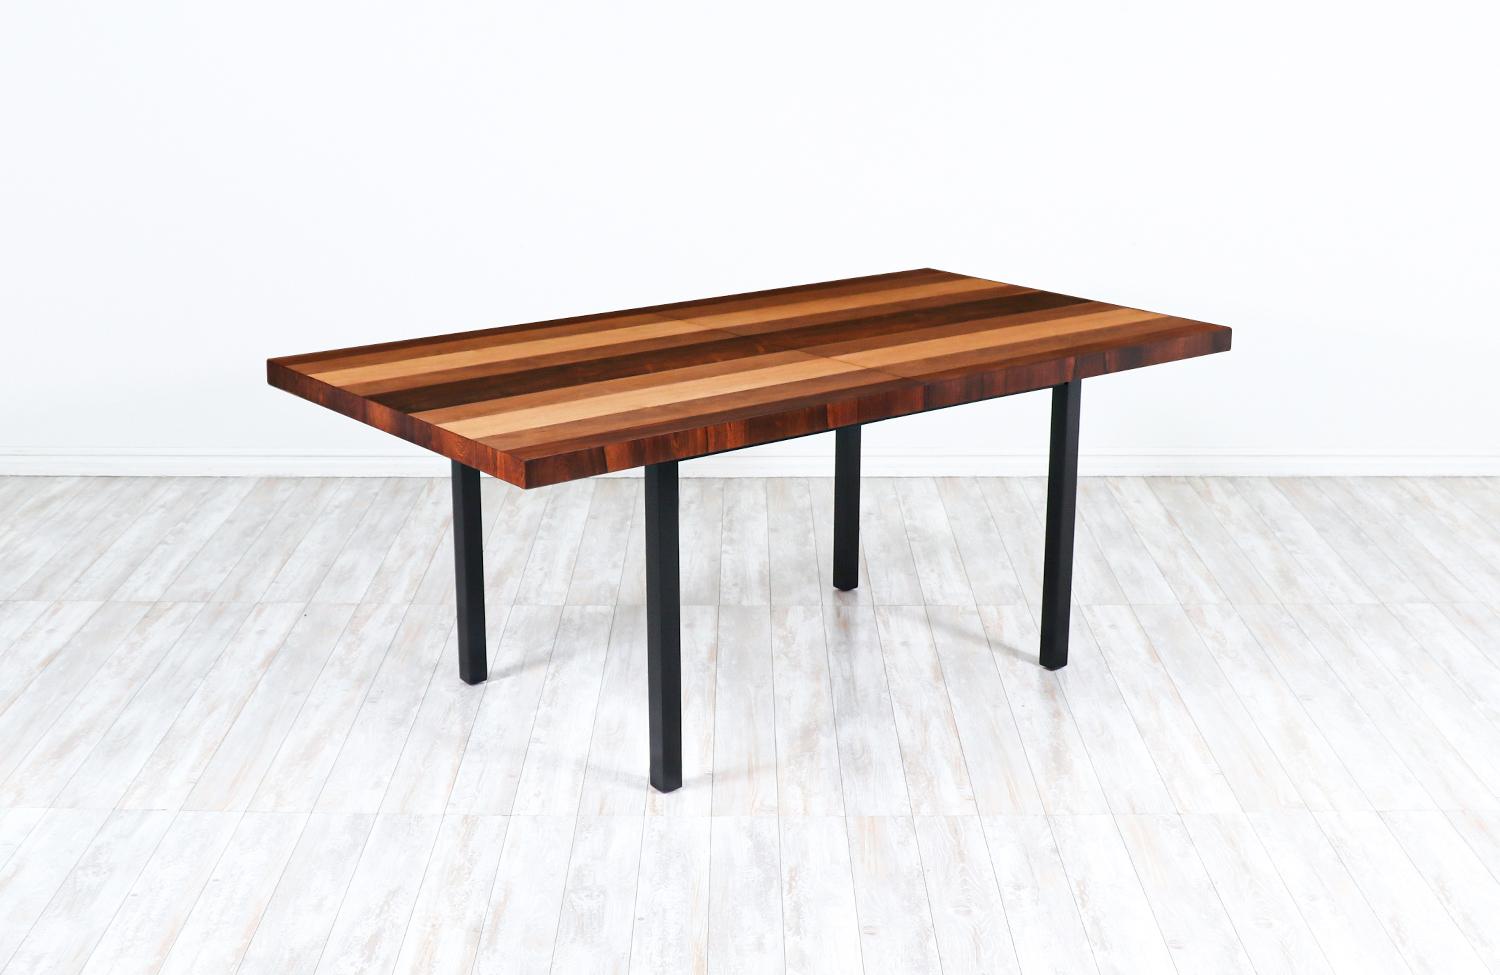 Milo Baughman Multi-Wood Expanding dining table for Directional 

Dimensions
29.50in H x 72in-112in W x 39in D 
2x Leaves - 20in Each.